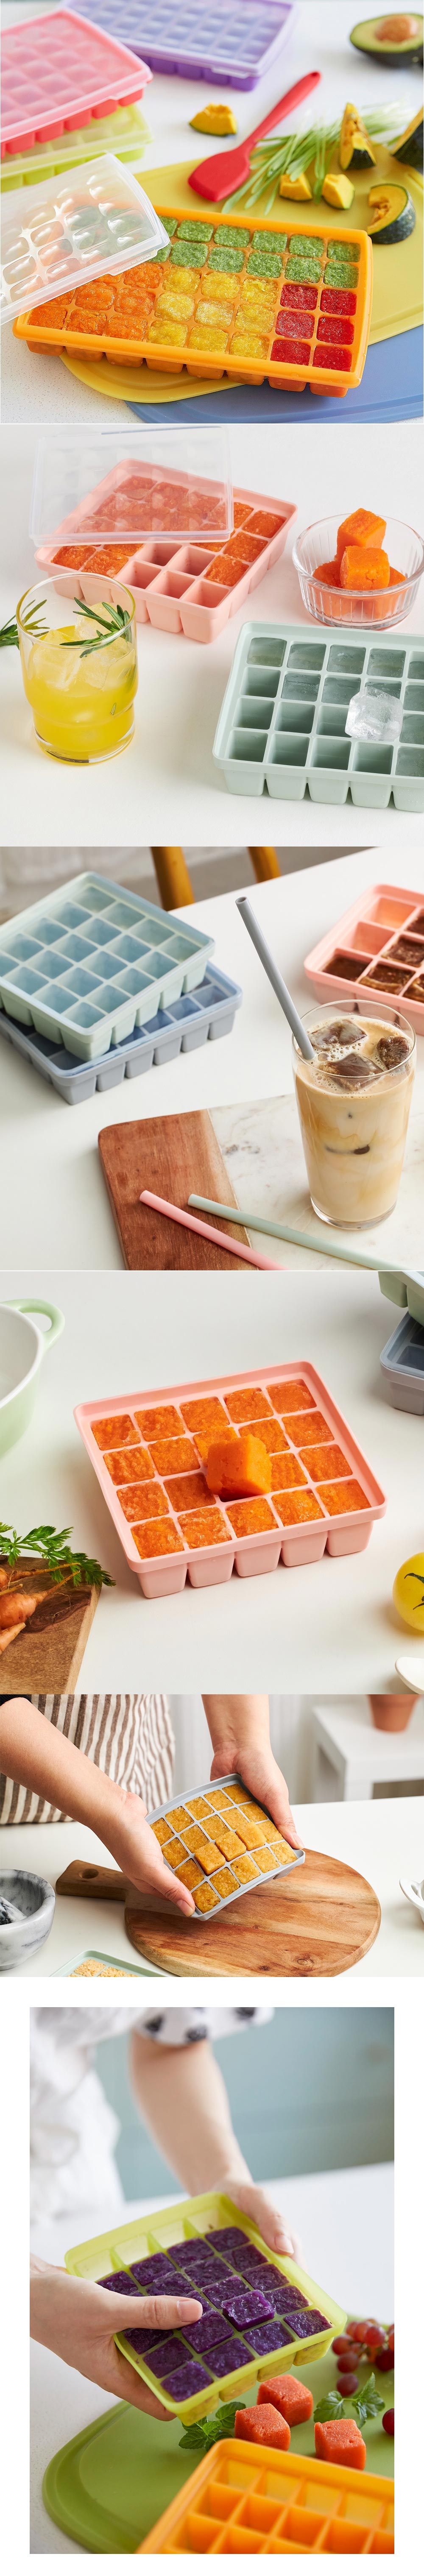 Silicone ice trays